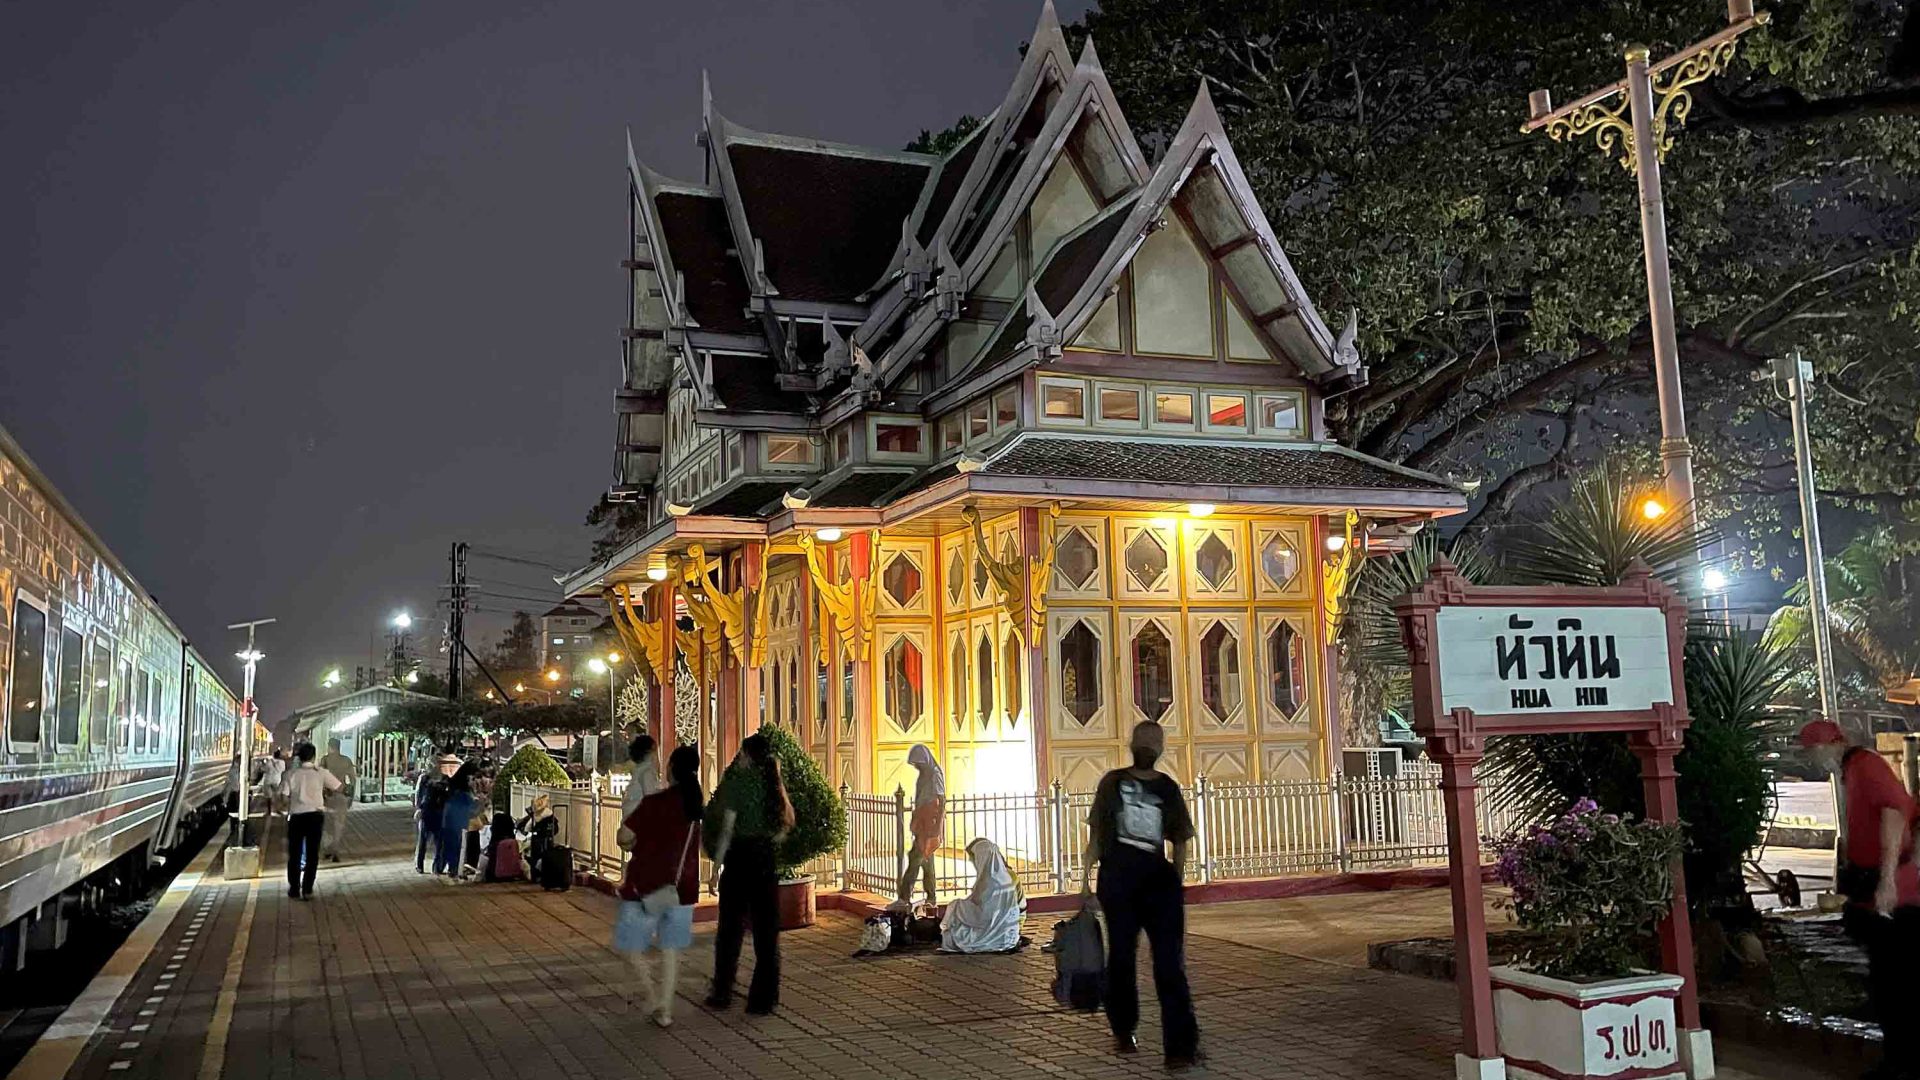 Express 31 at Hua Hin station at night. The station is lit up and people walk along the platform.